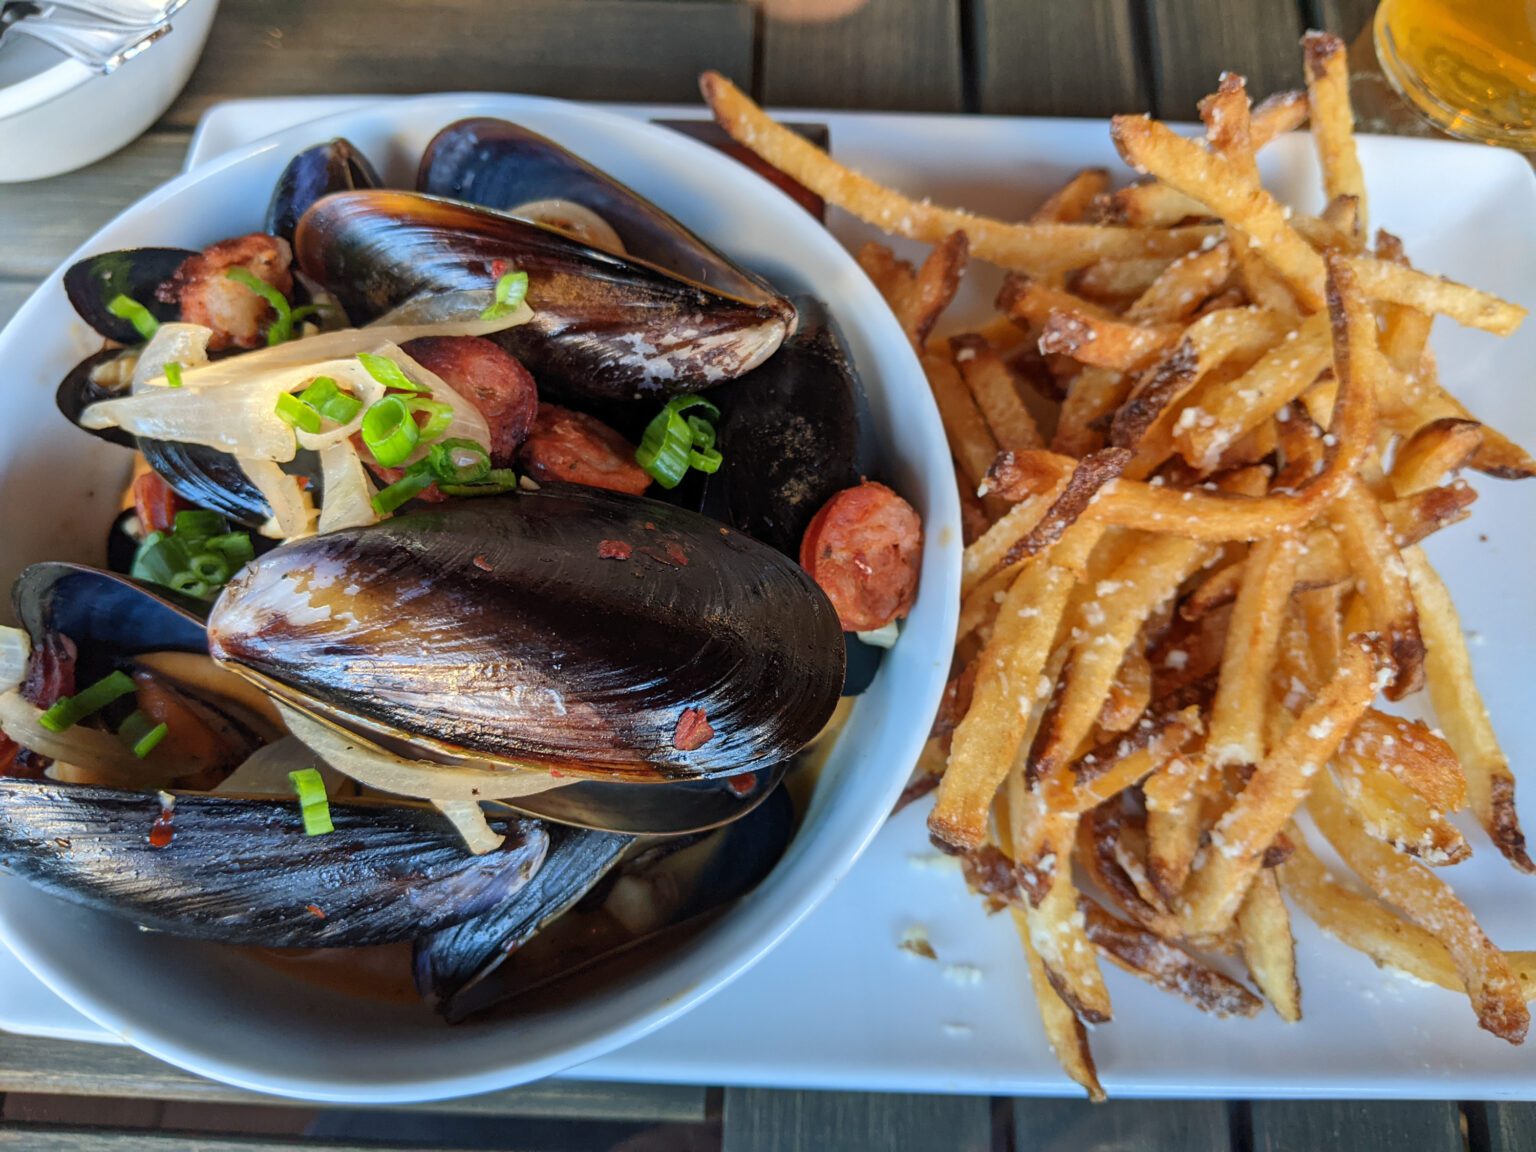 Moules frites have been a standby on the menu since the restaurant first opened. The pllump mussels are served in a rich chorizo-studded broth so good you may want to drink it all